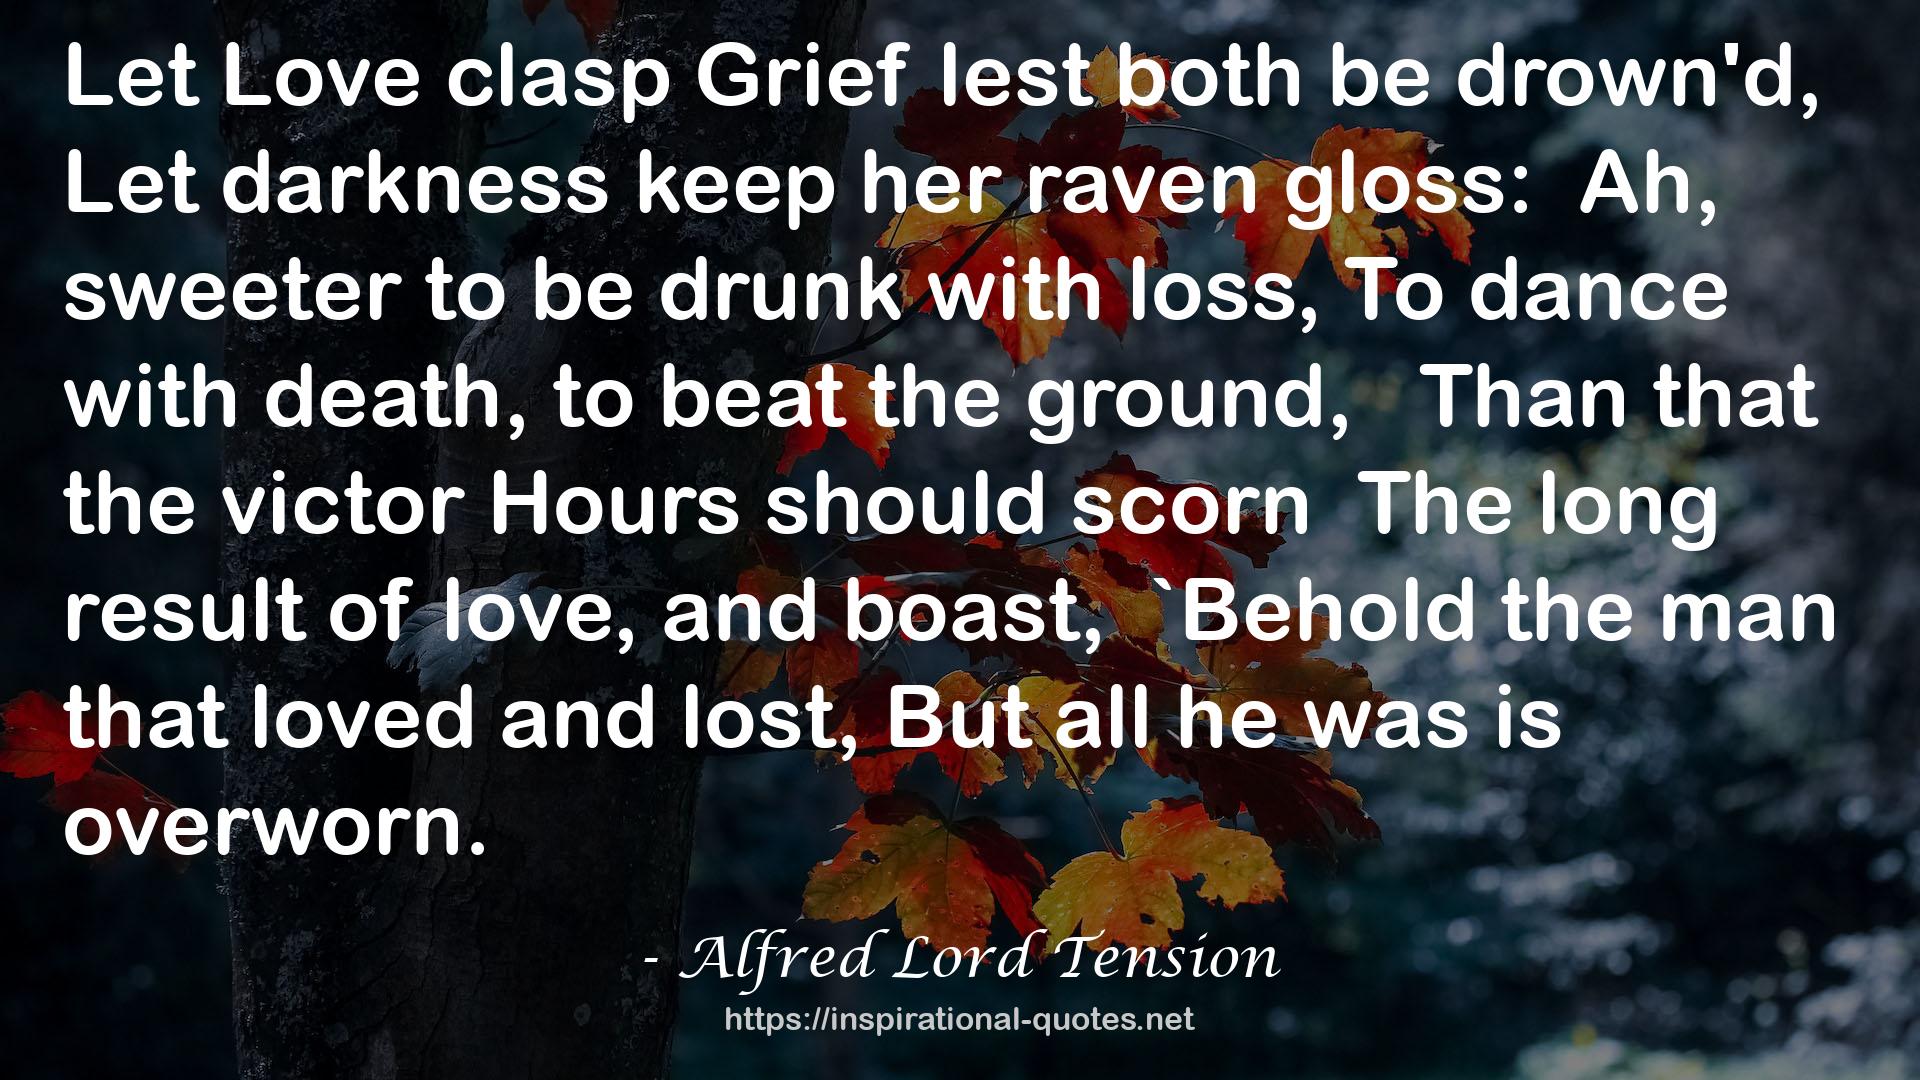 Alfred Lord Tension QUOTES